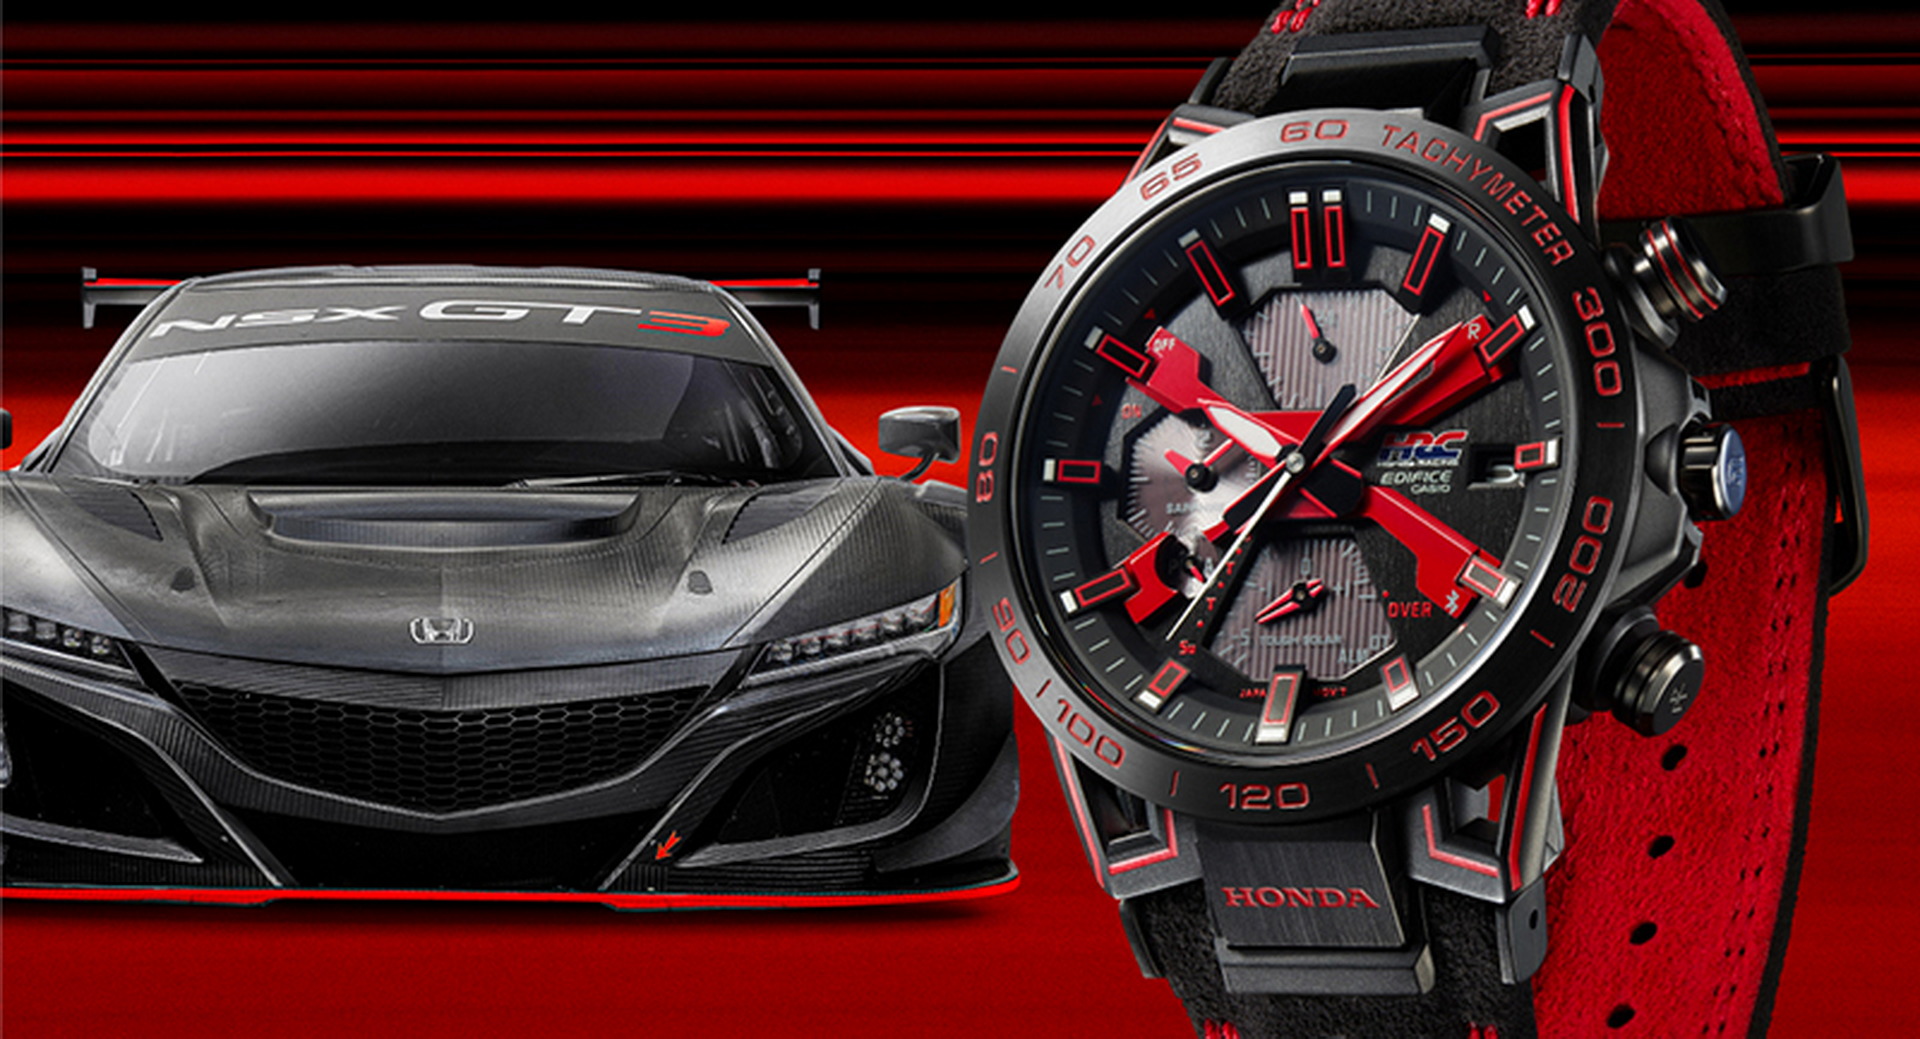 Casio Edifice “Honda Racing Red Edition” Is Inspired By Brand's